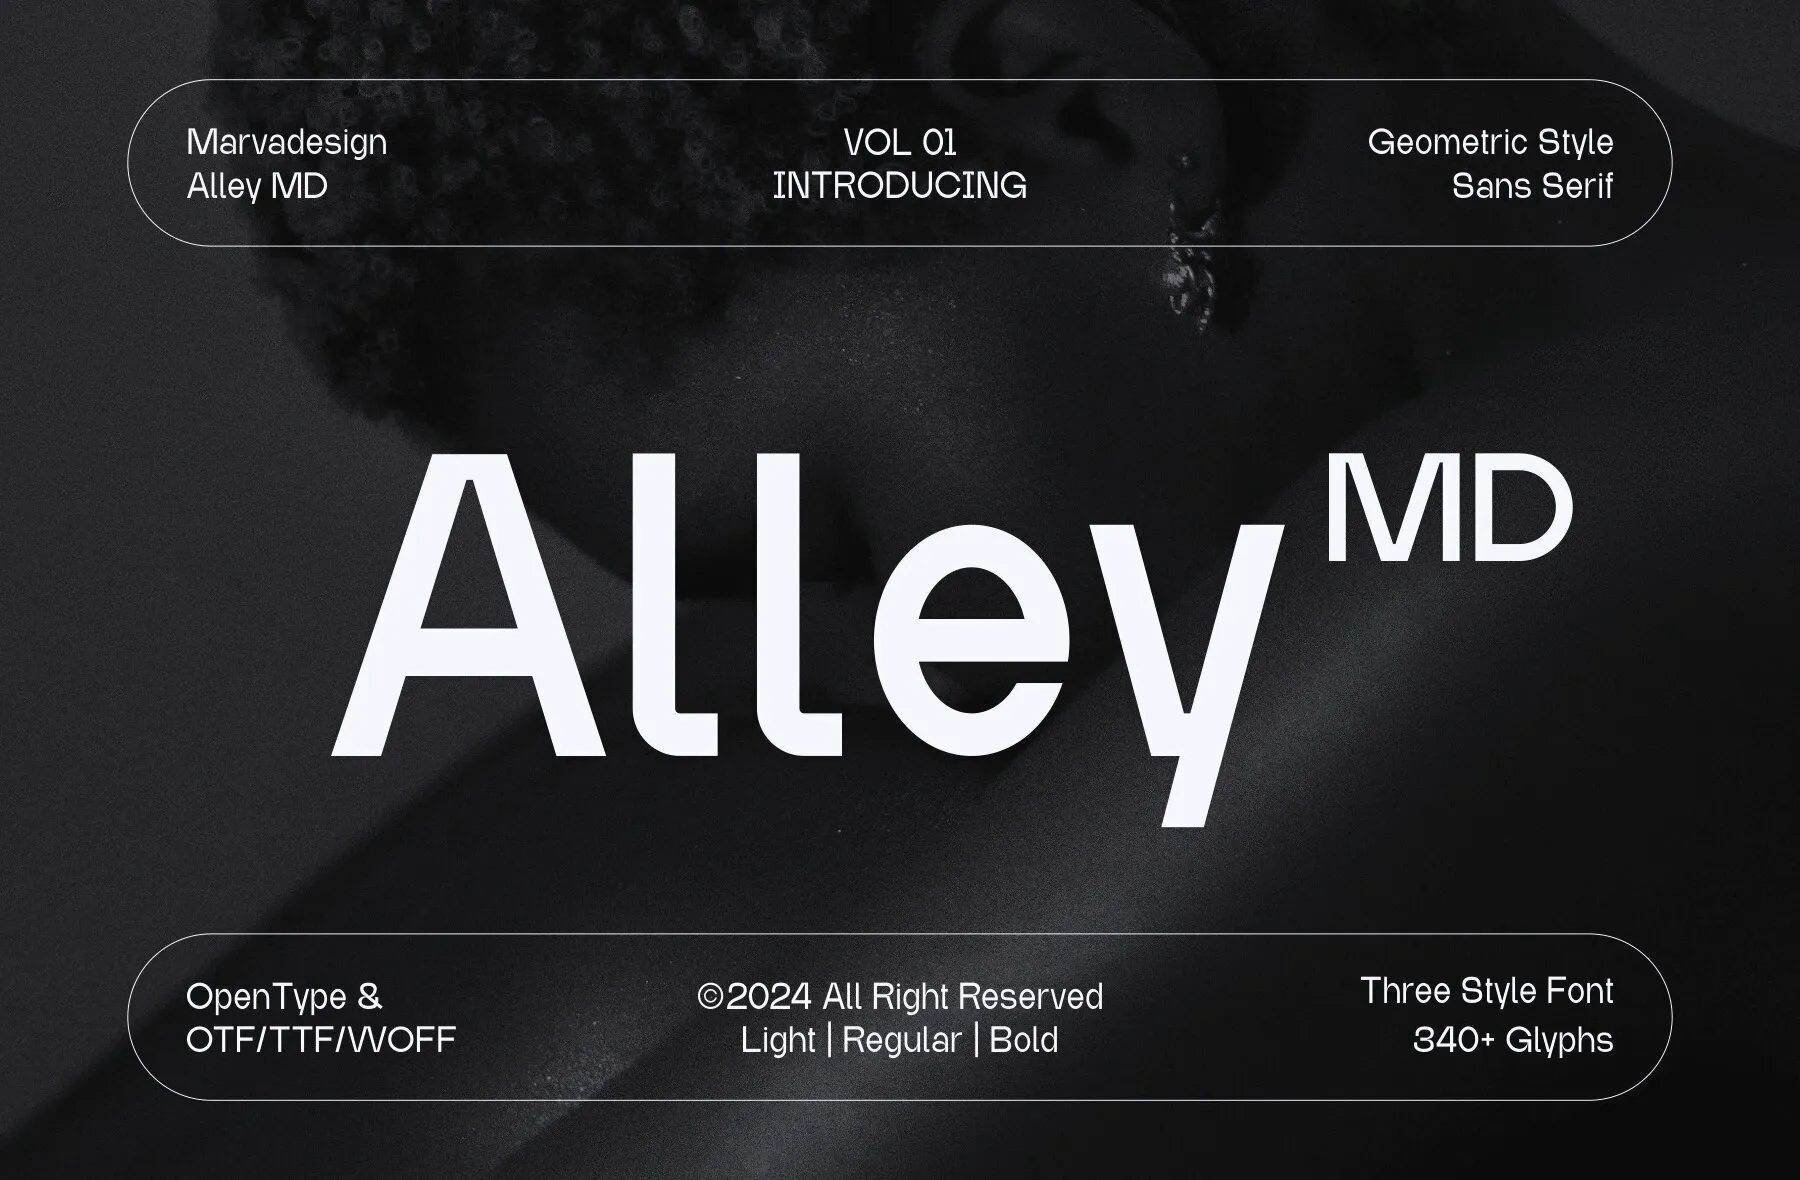 Alley MD